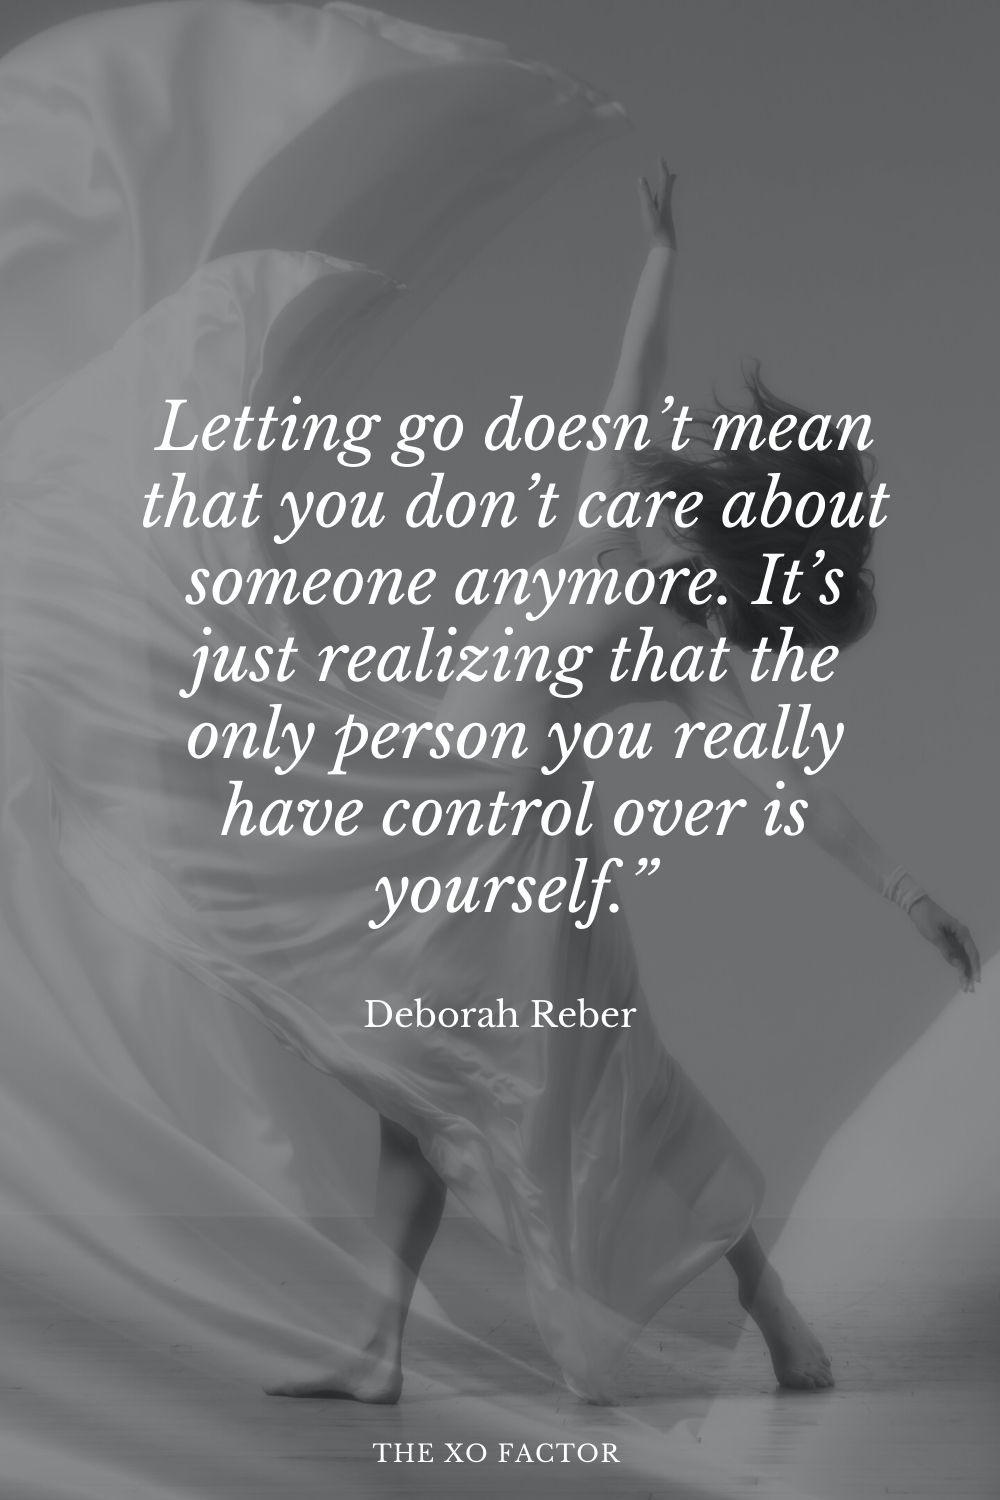 Letting go doesn’t mean that you don’t care about someone anymore. It’s just realizing that the only person you really have control over is yourself.” Deborah Reber